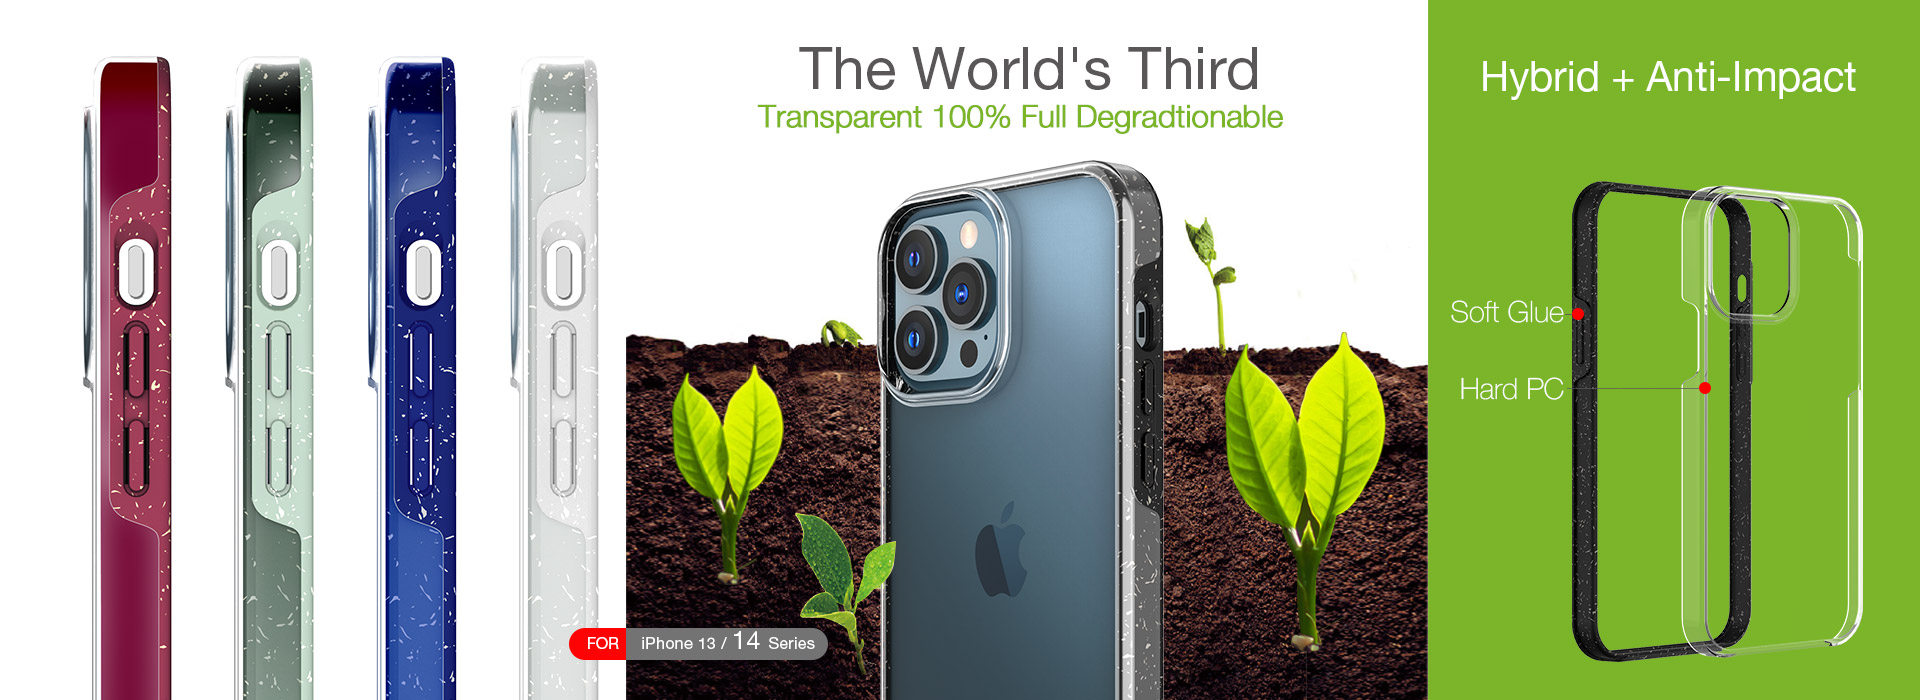 Fashionable Hybrid Transparent 100% biodegradable  Case For iPhone(Dark Red)